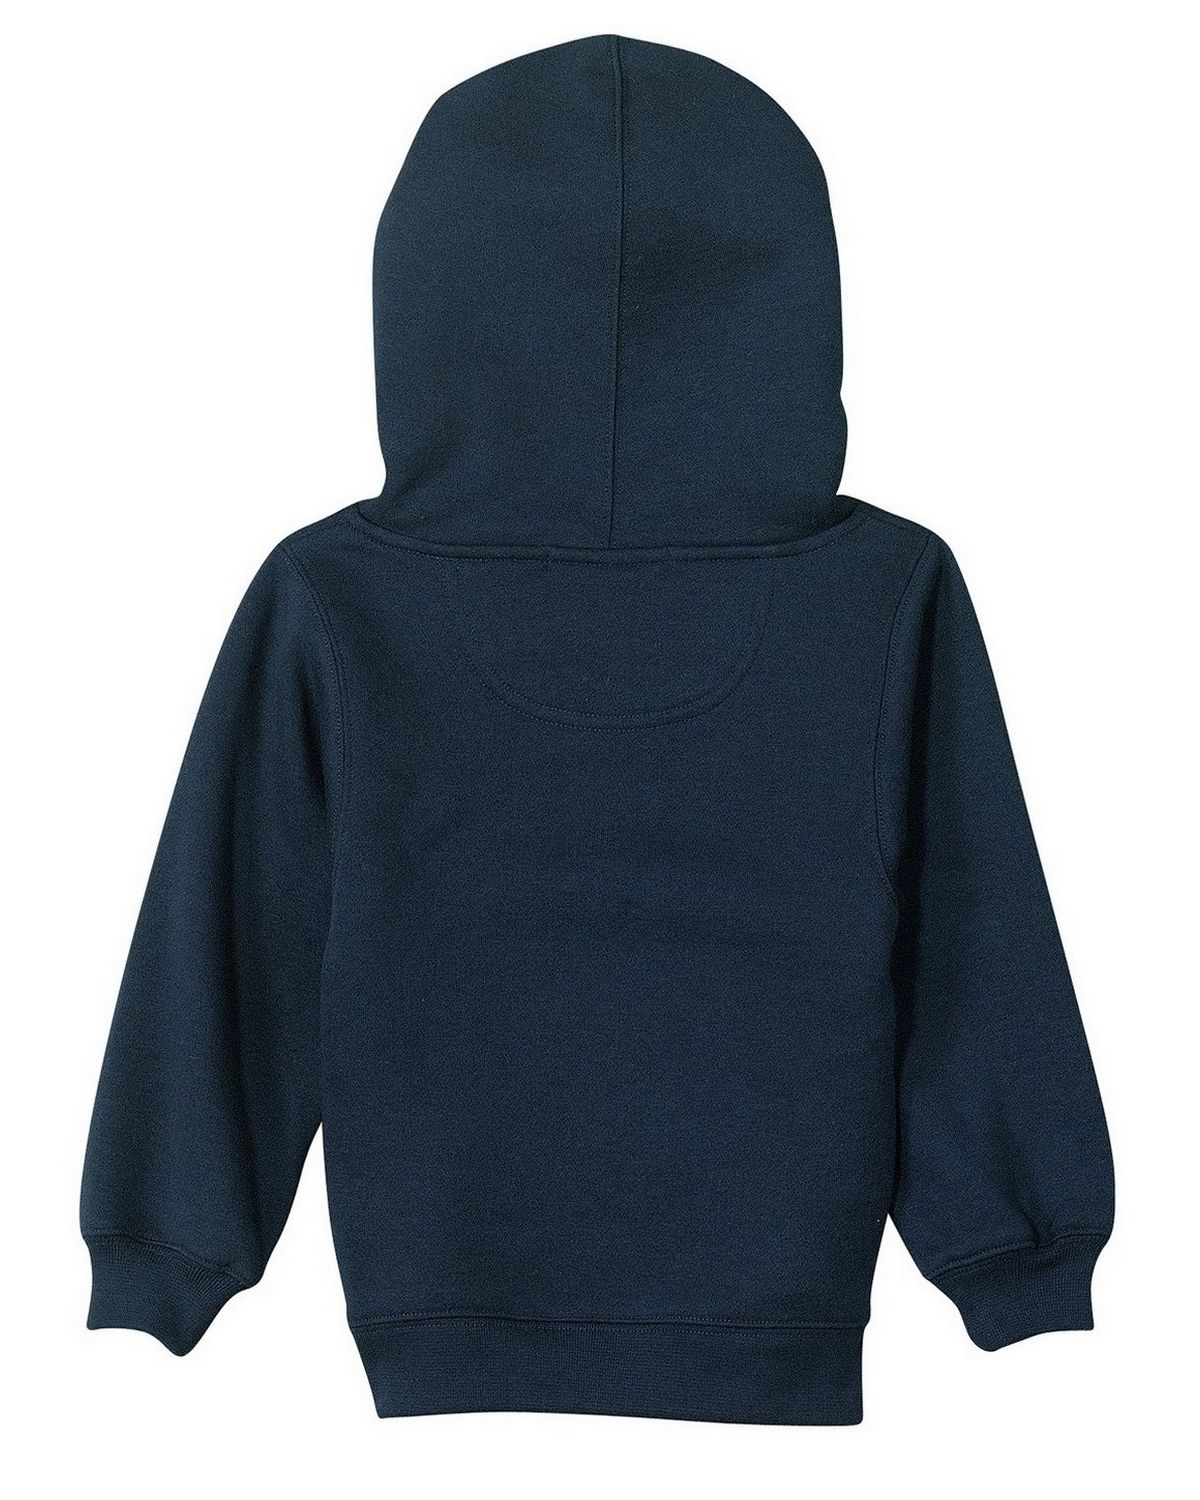 Sport-Tek Y254 Youth Pullover Hooded Sweatshirt by Port Authority